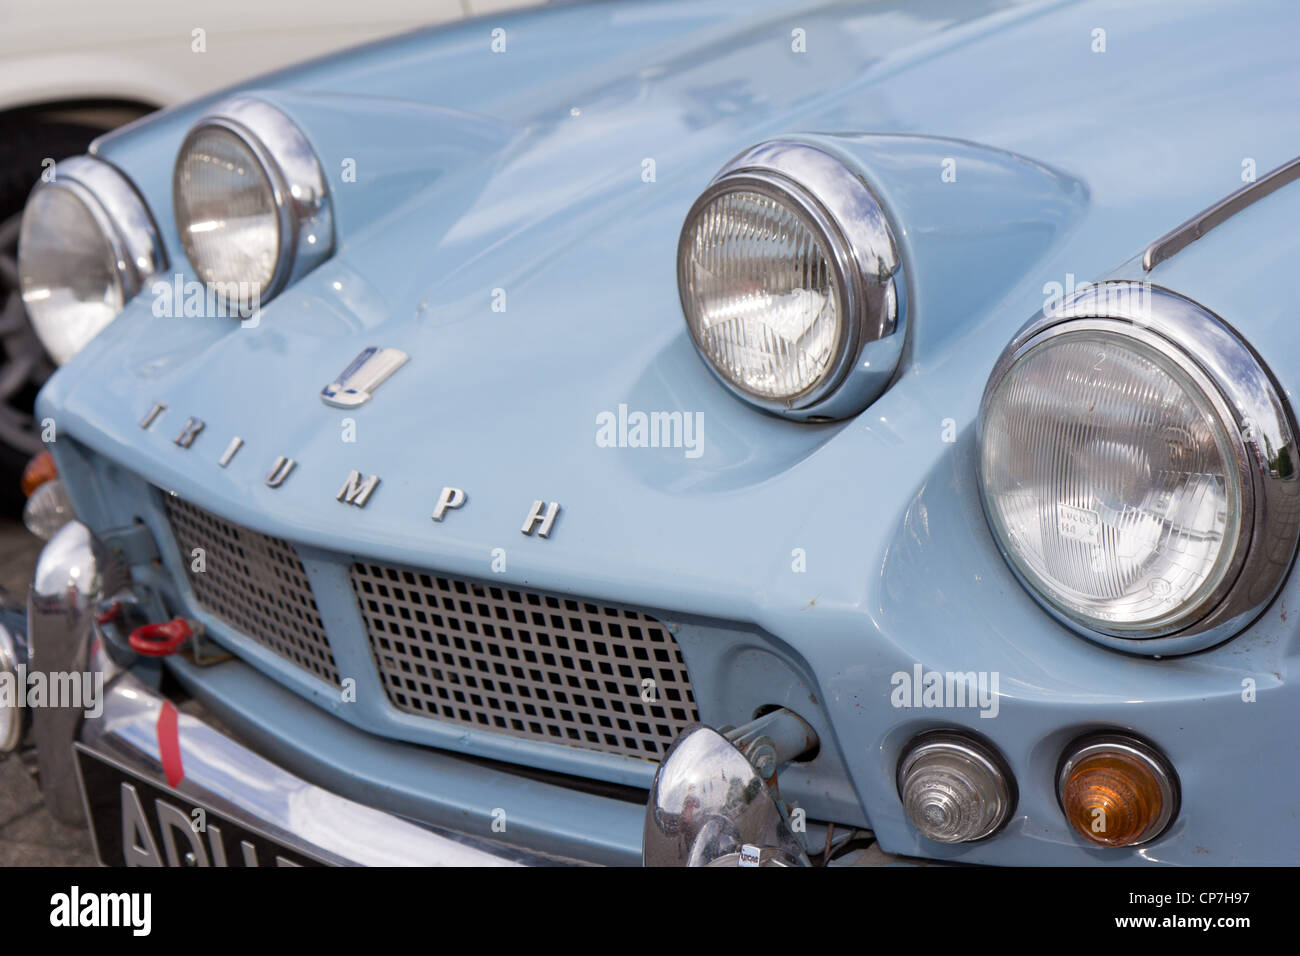 Vintage race car headlights of TRIUMPH Spitfire 1500 from 1978 on display at Grand Prix in Mutschellen, SUI on April 29, 2012. Stock Photo